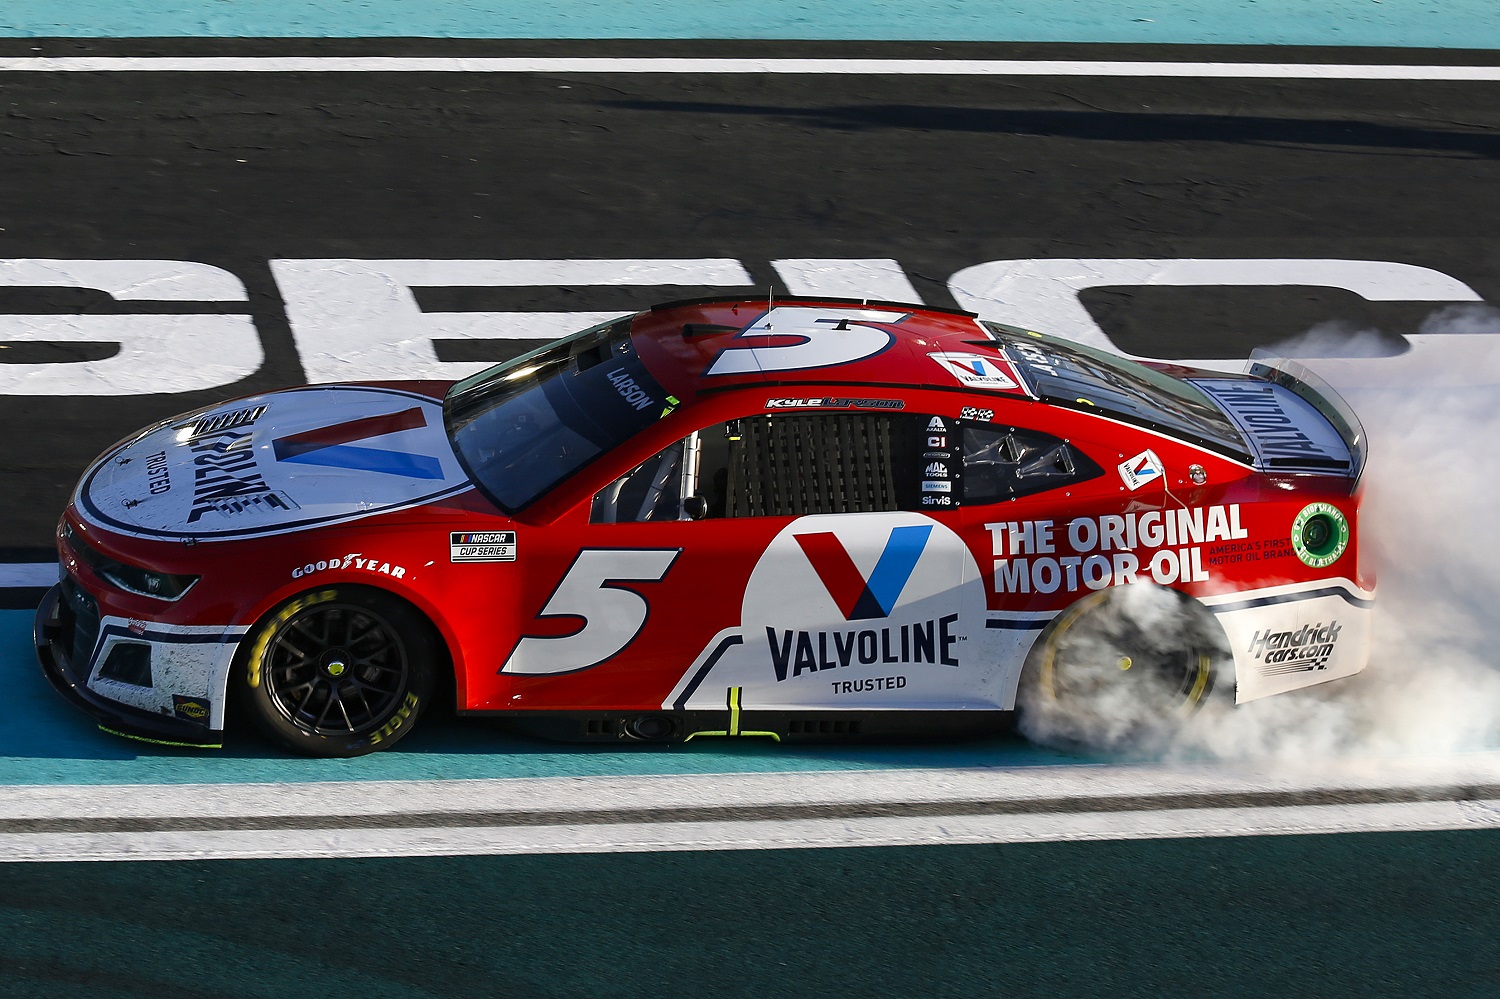 Kyle Larson celebrates with a burnout after winning the NASCAR Cup Series Dixie Vodka 400 at Homestead-Miami Speedway on Oct. 23, 2022. | Jared East/Getty Images